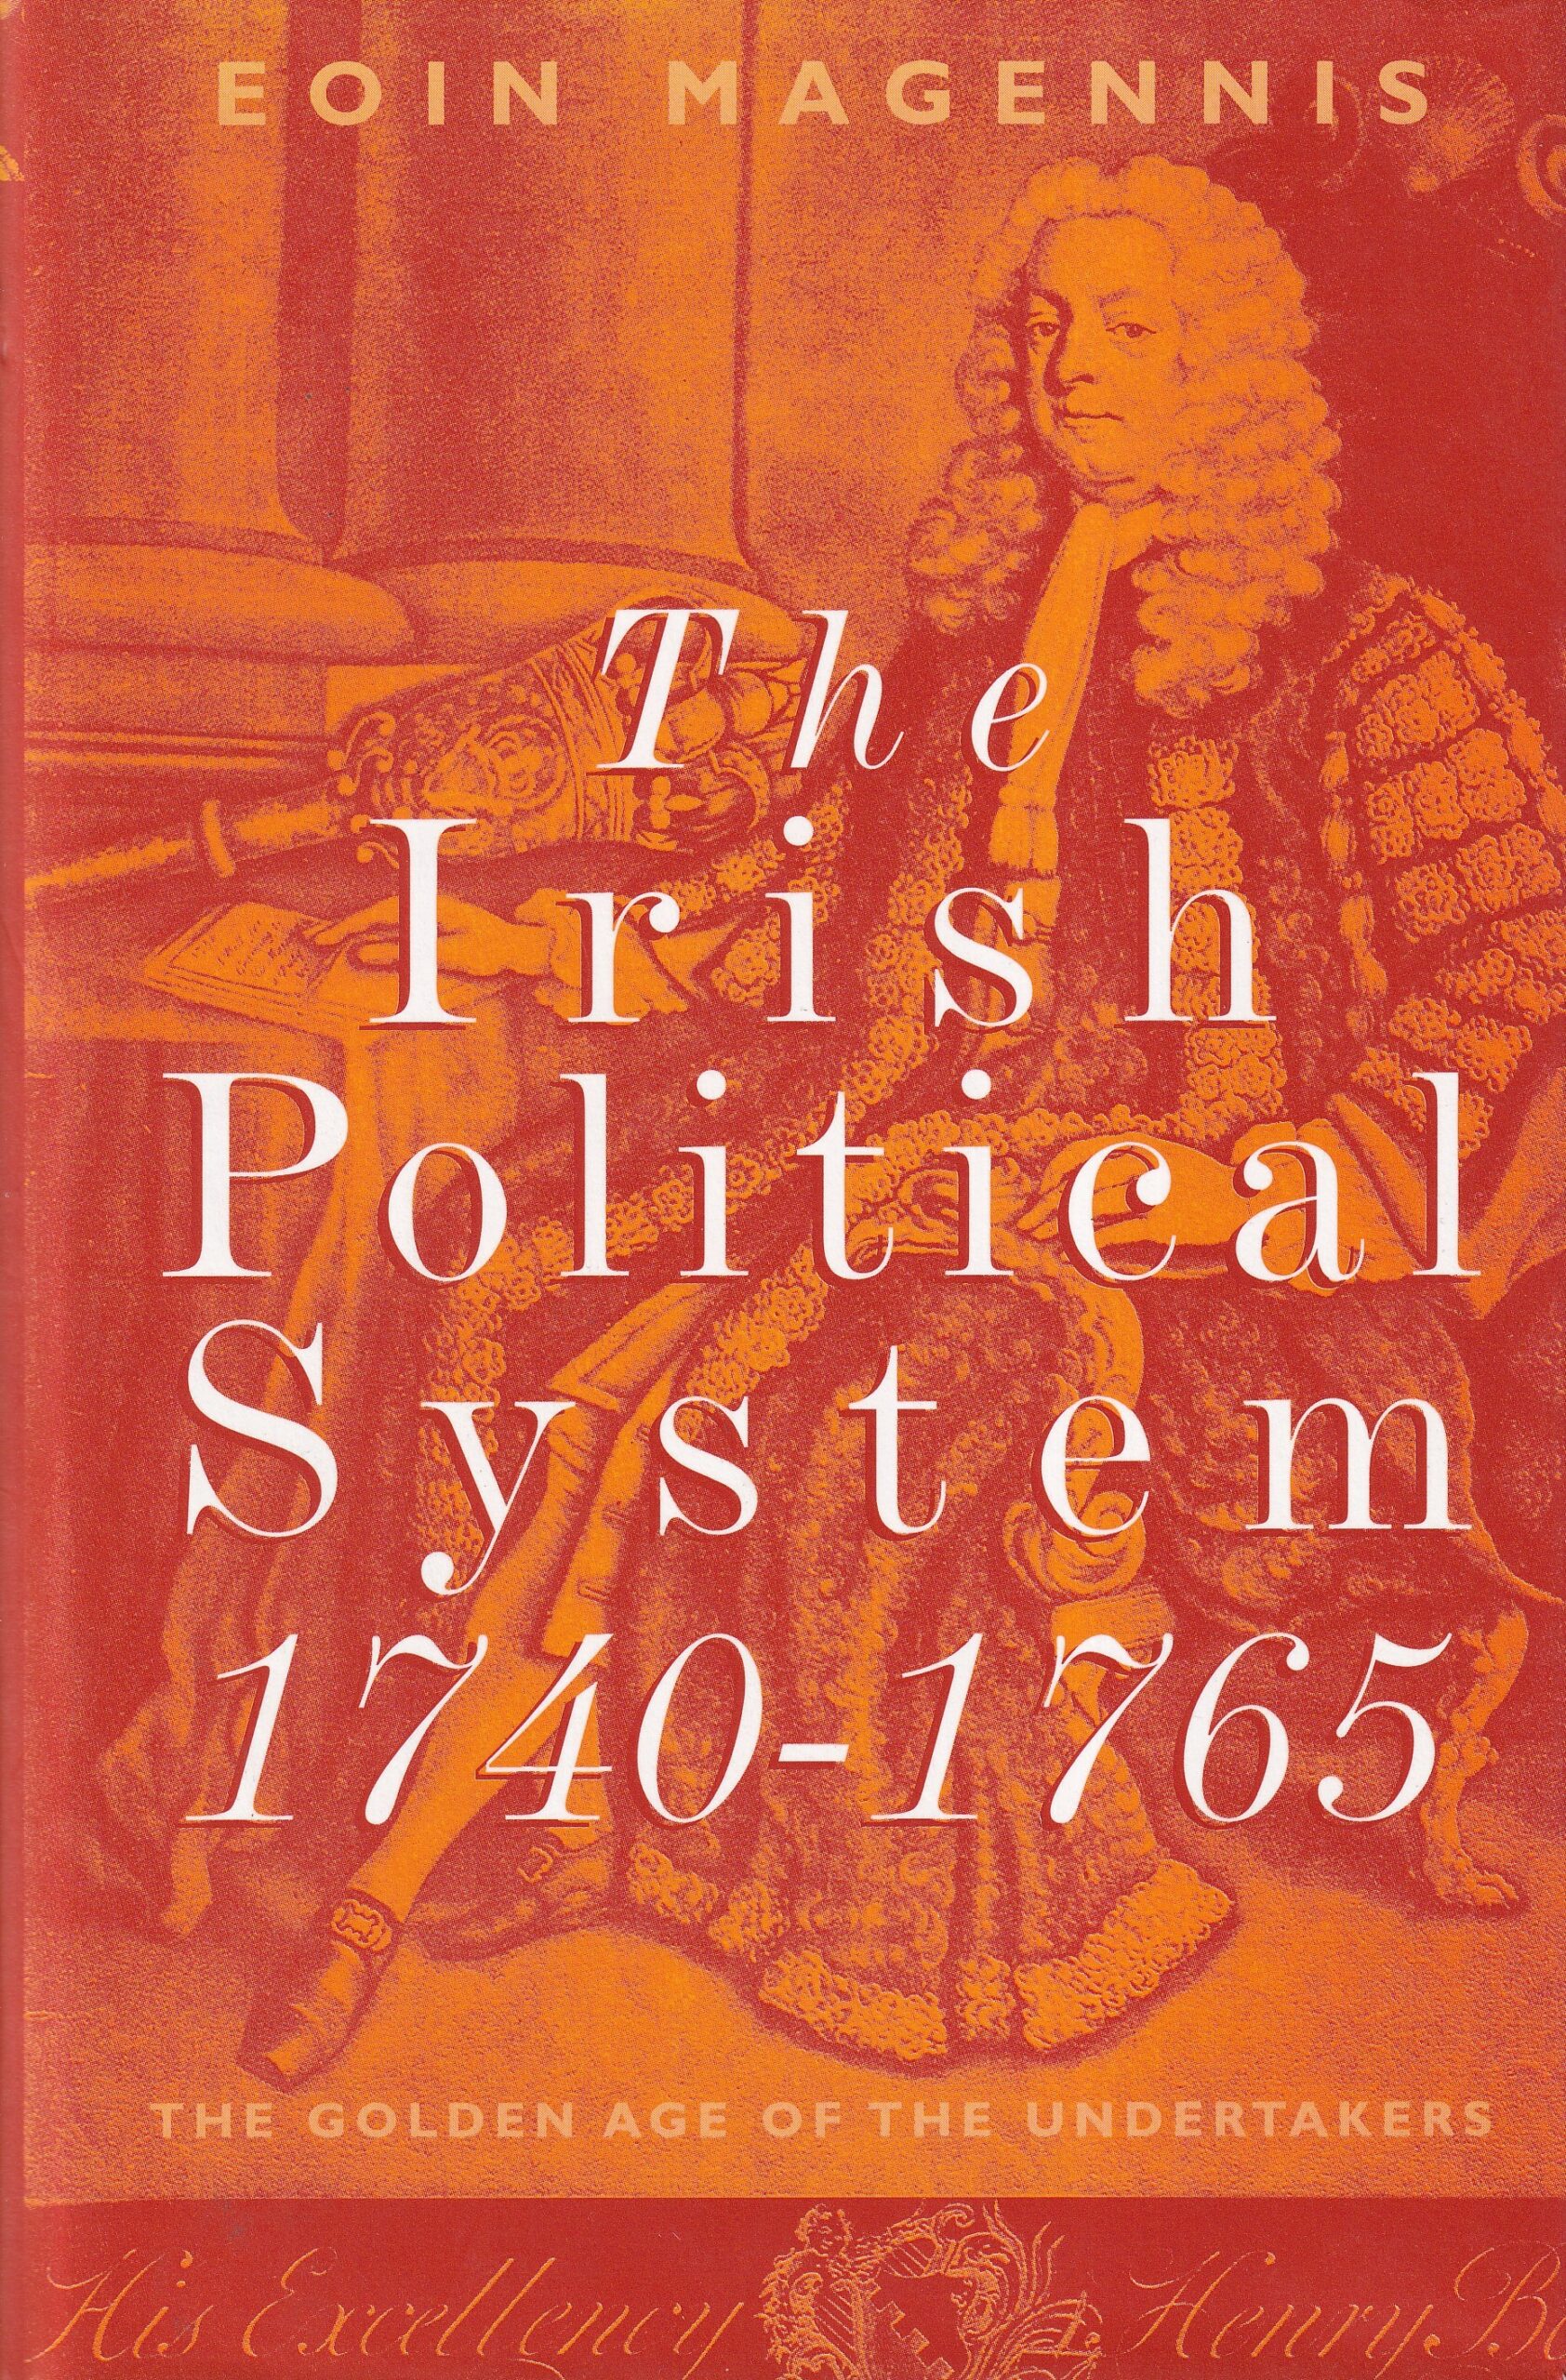 The Irish Political System, 1740-1765: The Golden Age of the Undertakers by Eoin Magennis